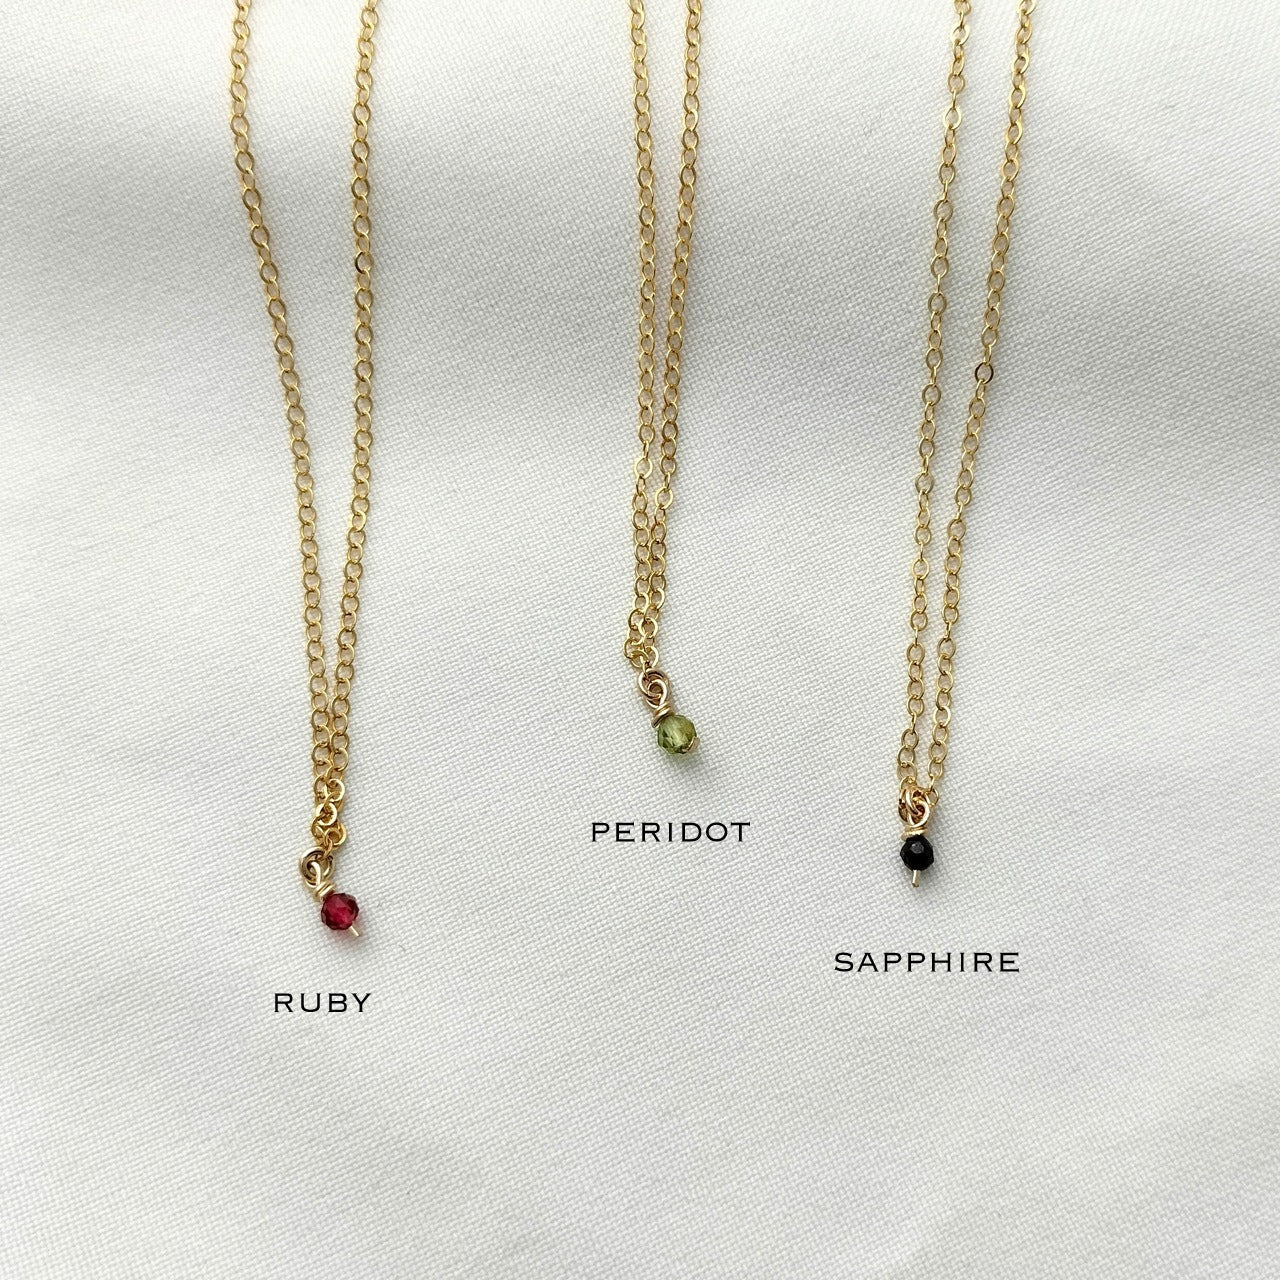 Small birthstone necklace